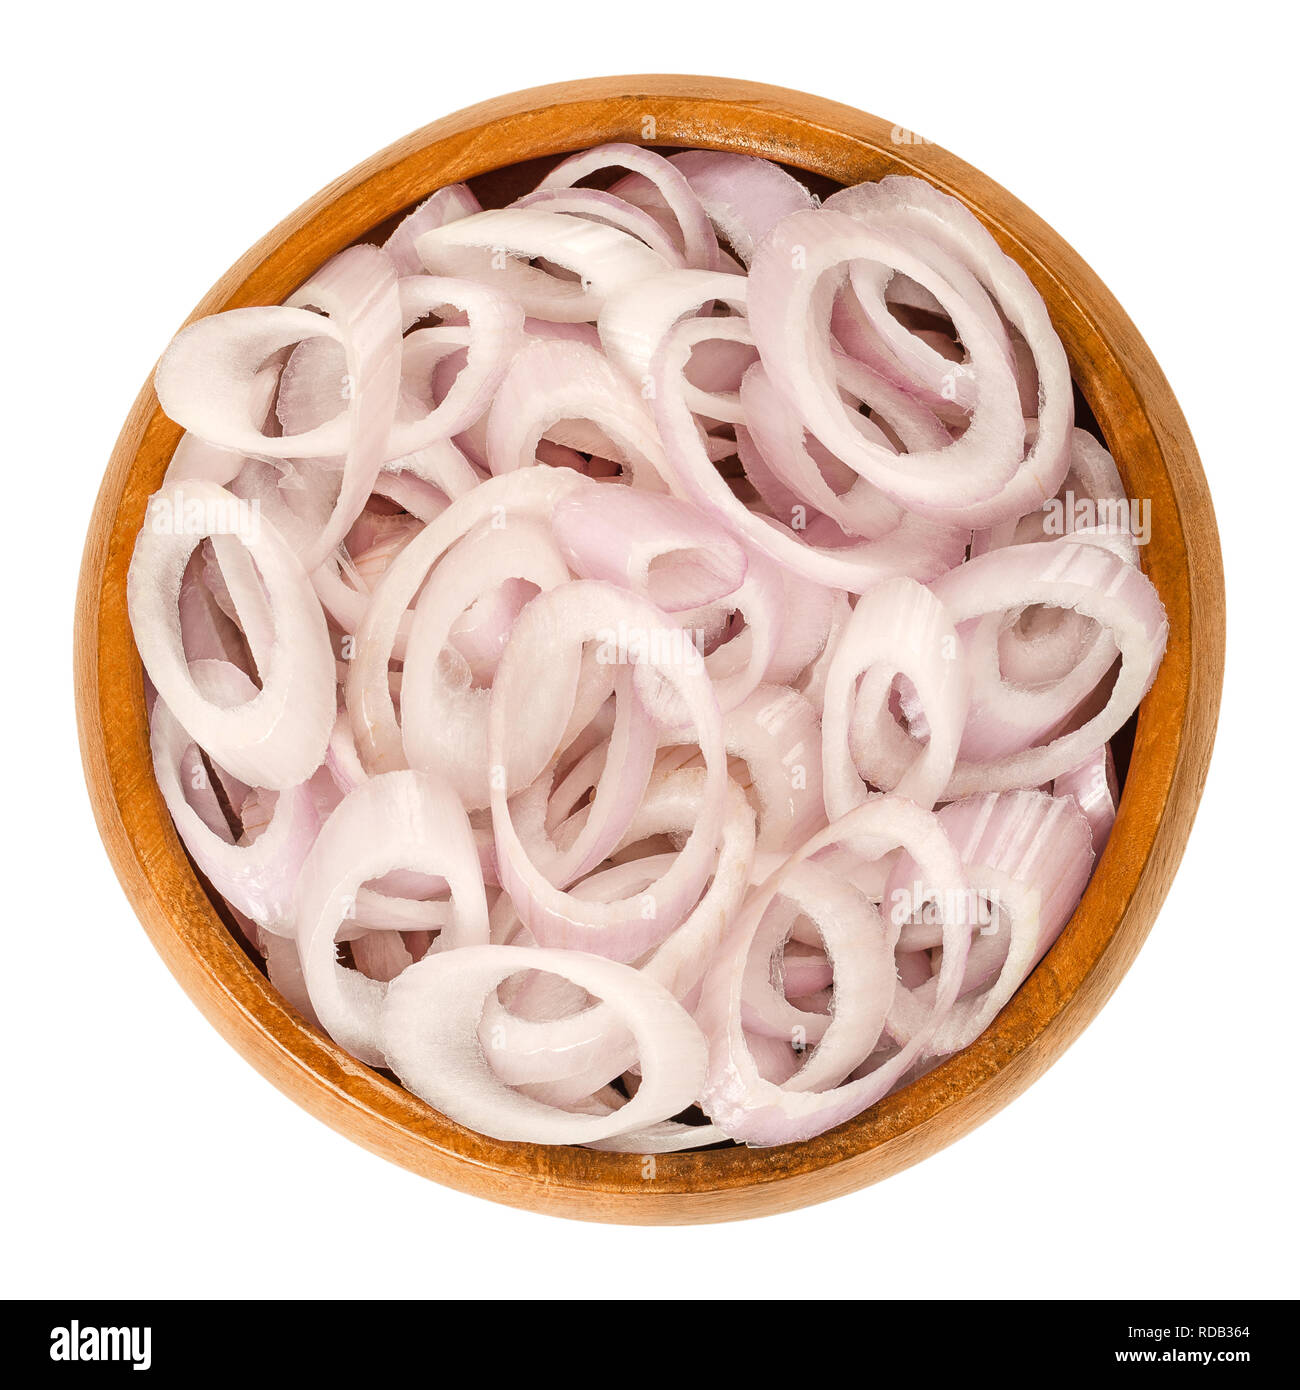 Rings of sliced shallots in wooden bowl. Chopped. Type of onion and variety of Allium cepa. Purple, edible, raw, organic, vegan, plant. Stock Photo